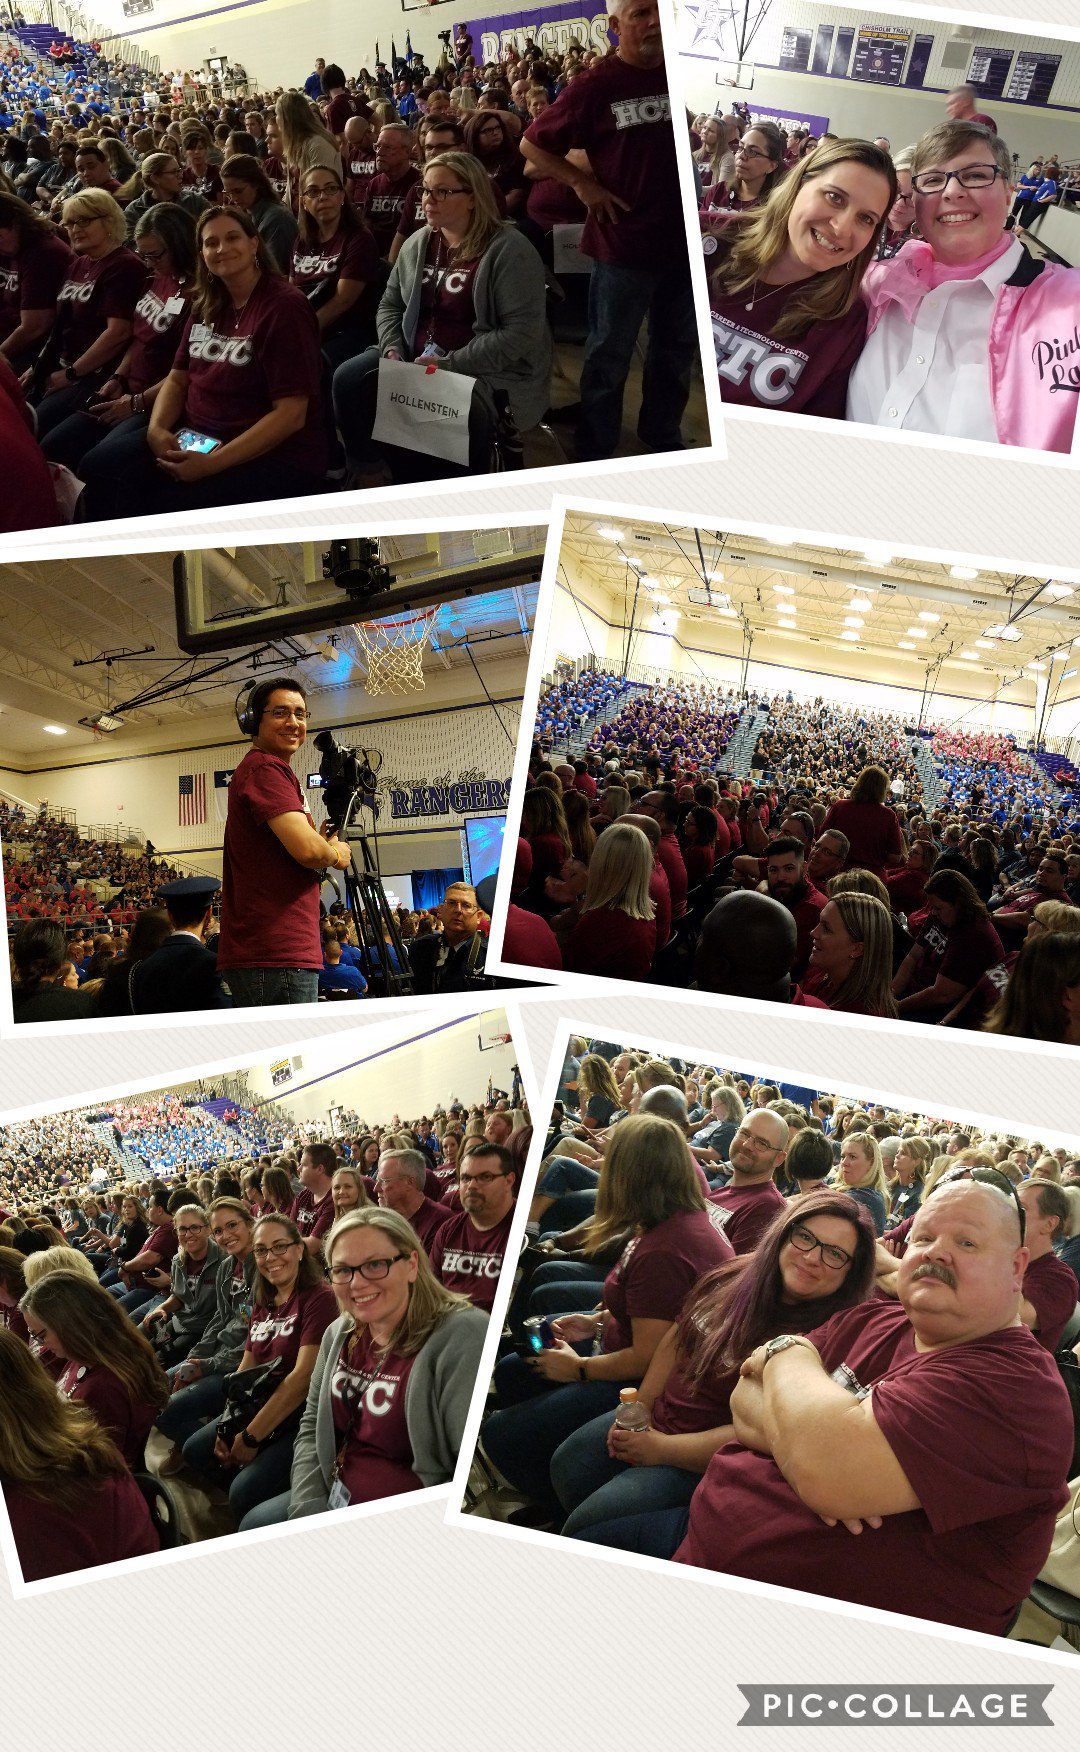 EMSISD CTE on Twitter: "2018 EMS ISD Convocation! What a great way to